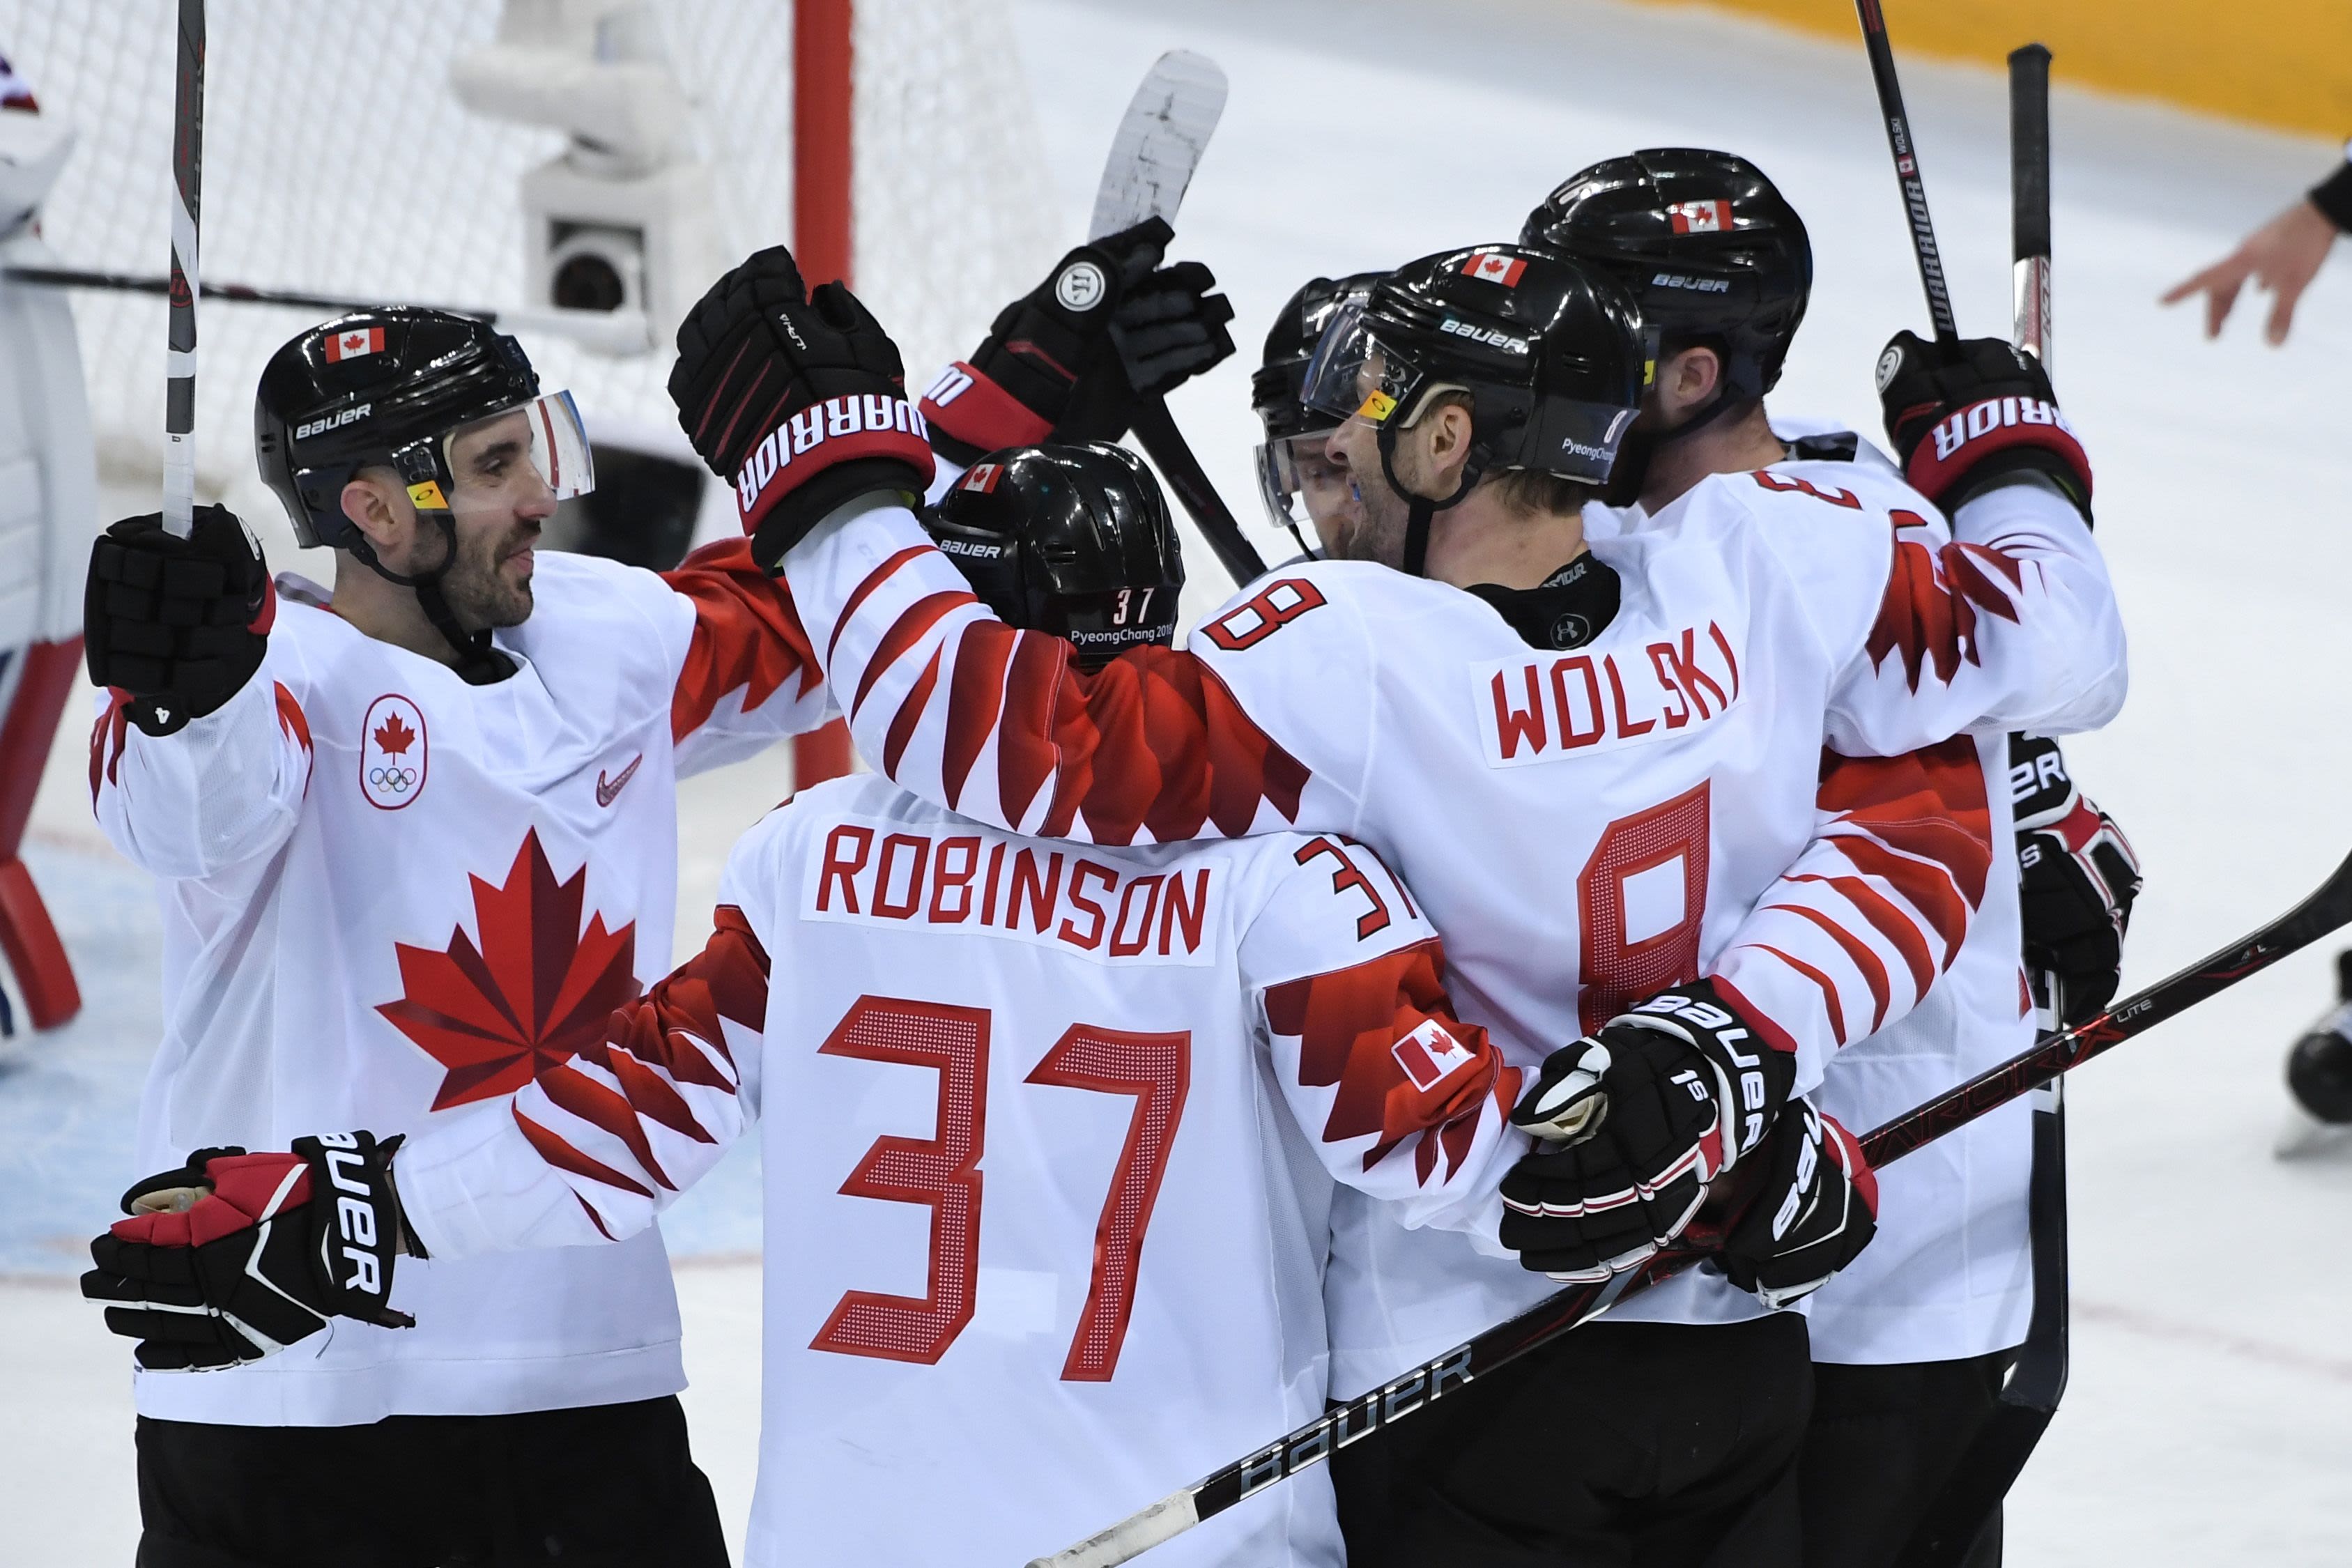 The NHL's Olympic ban won't determine Team Canada's success at Pyeongchang  - The Gauntlet